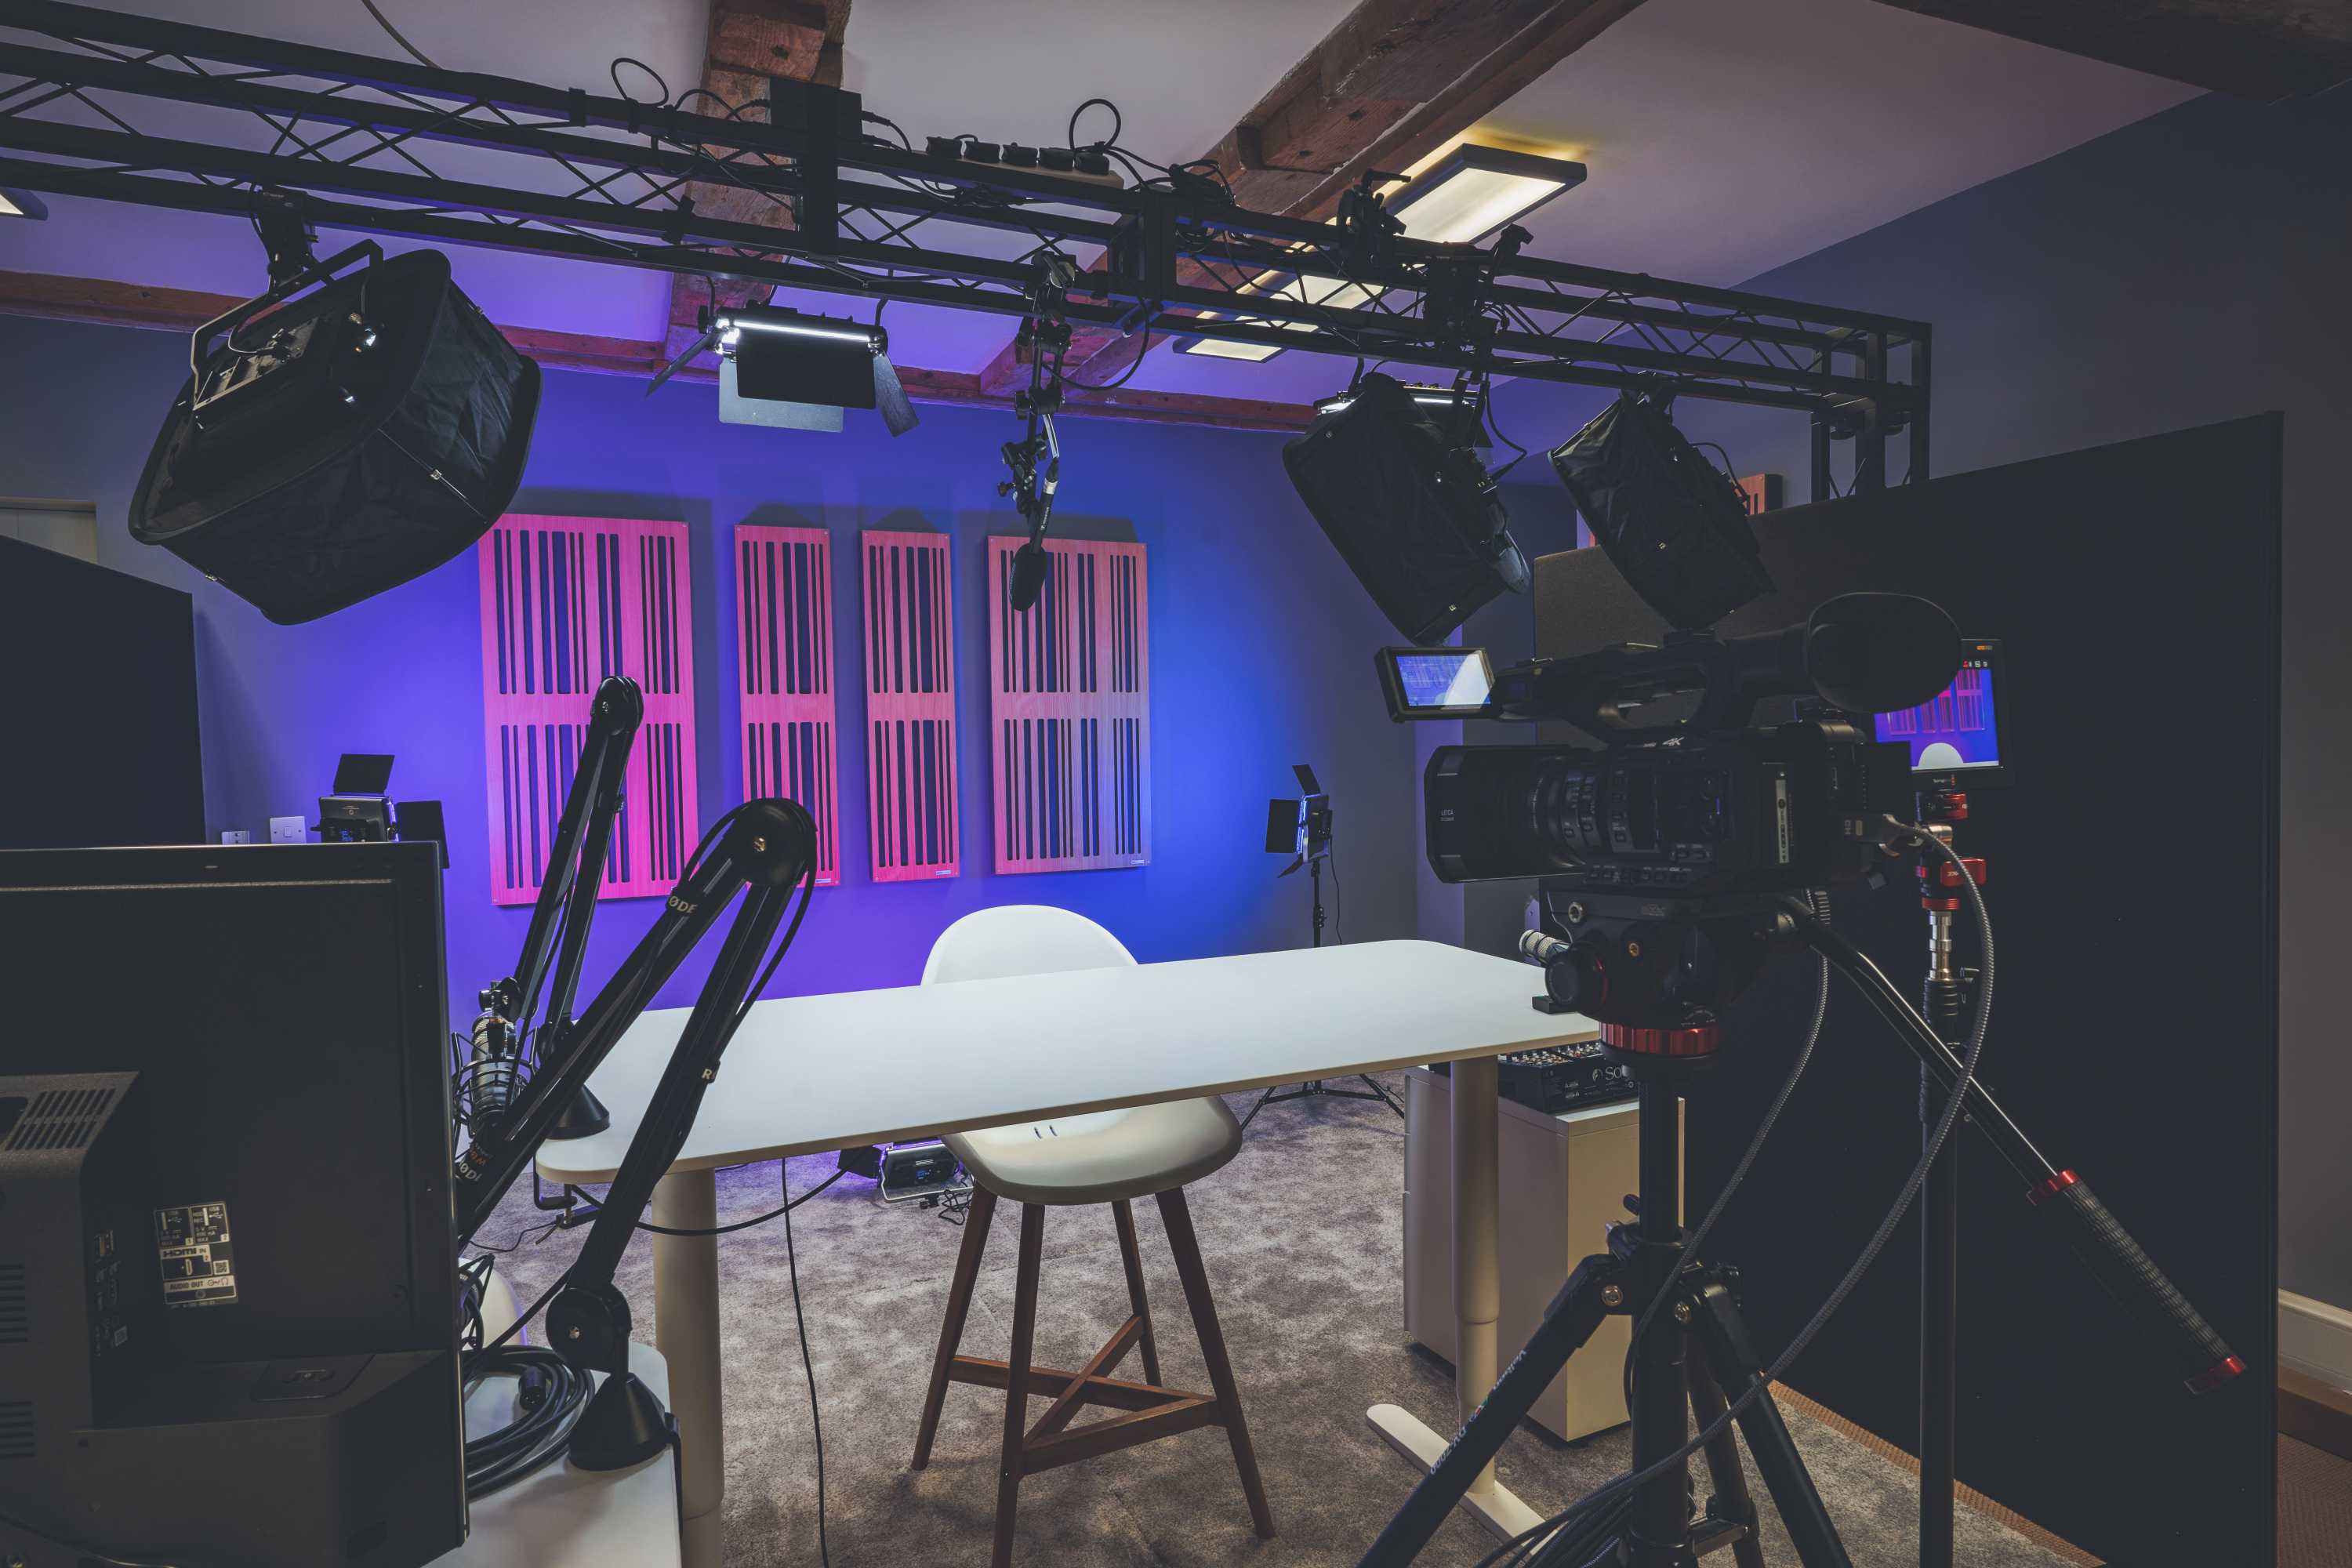 A fully equipped video studio with camera, lighting and sound equipment. The back wall is light in purple and has sound deadening panels.